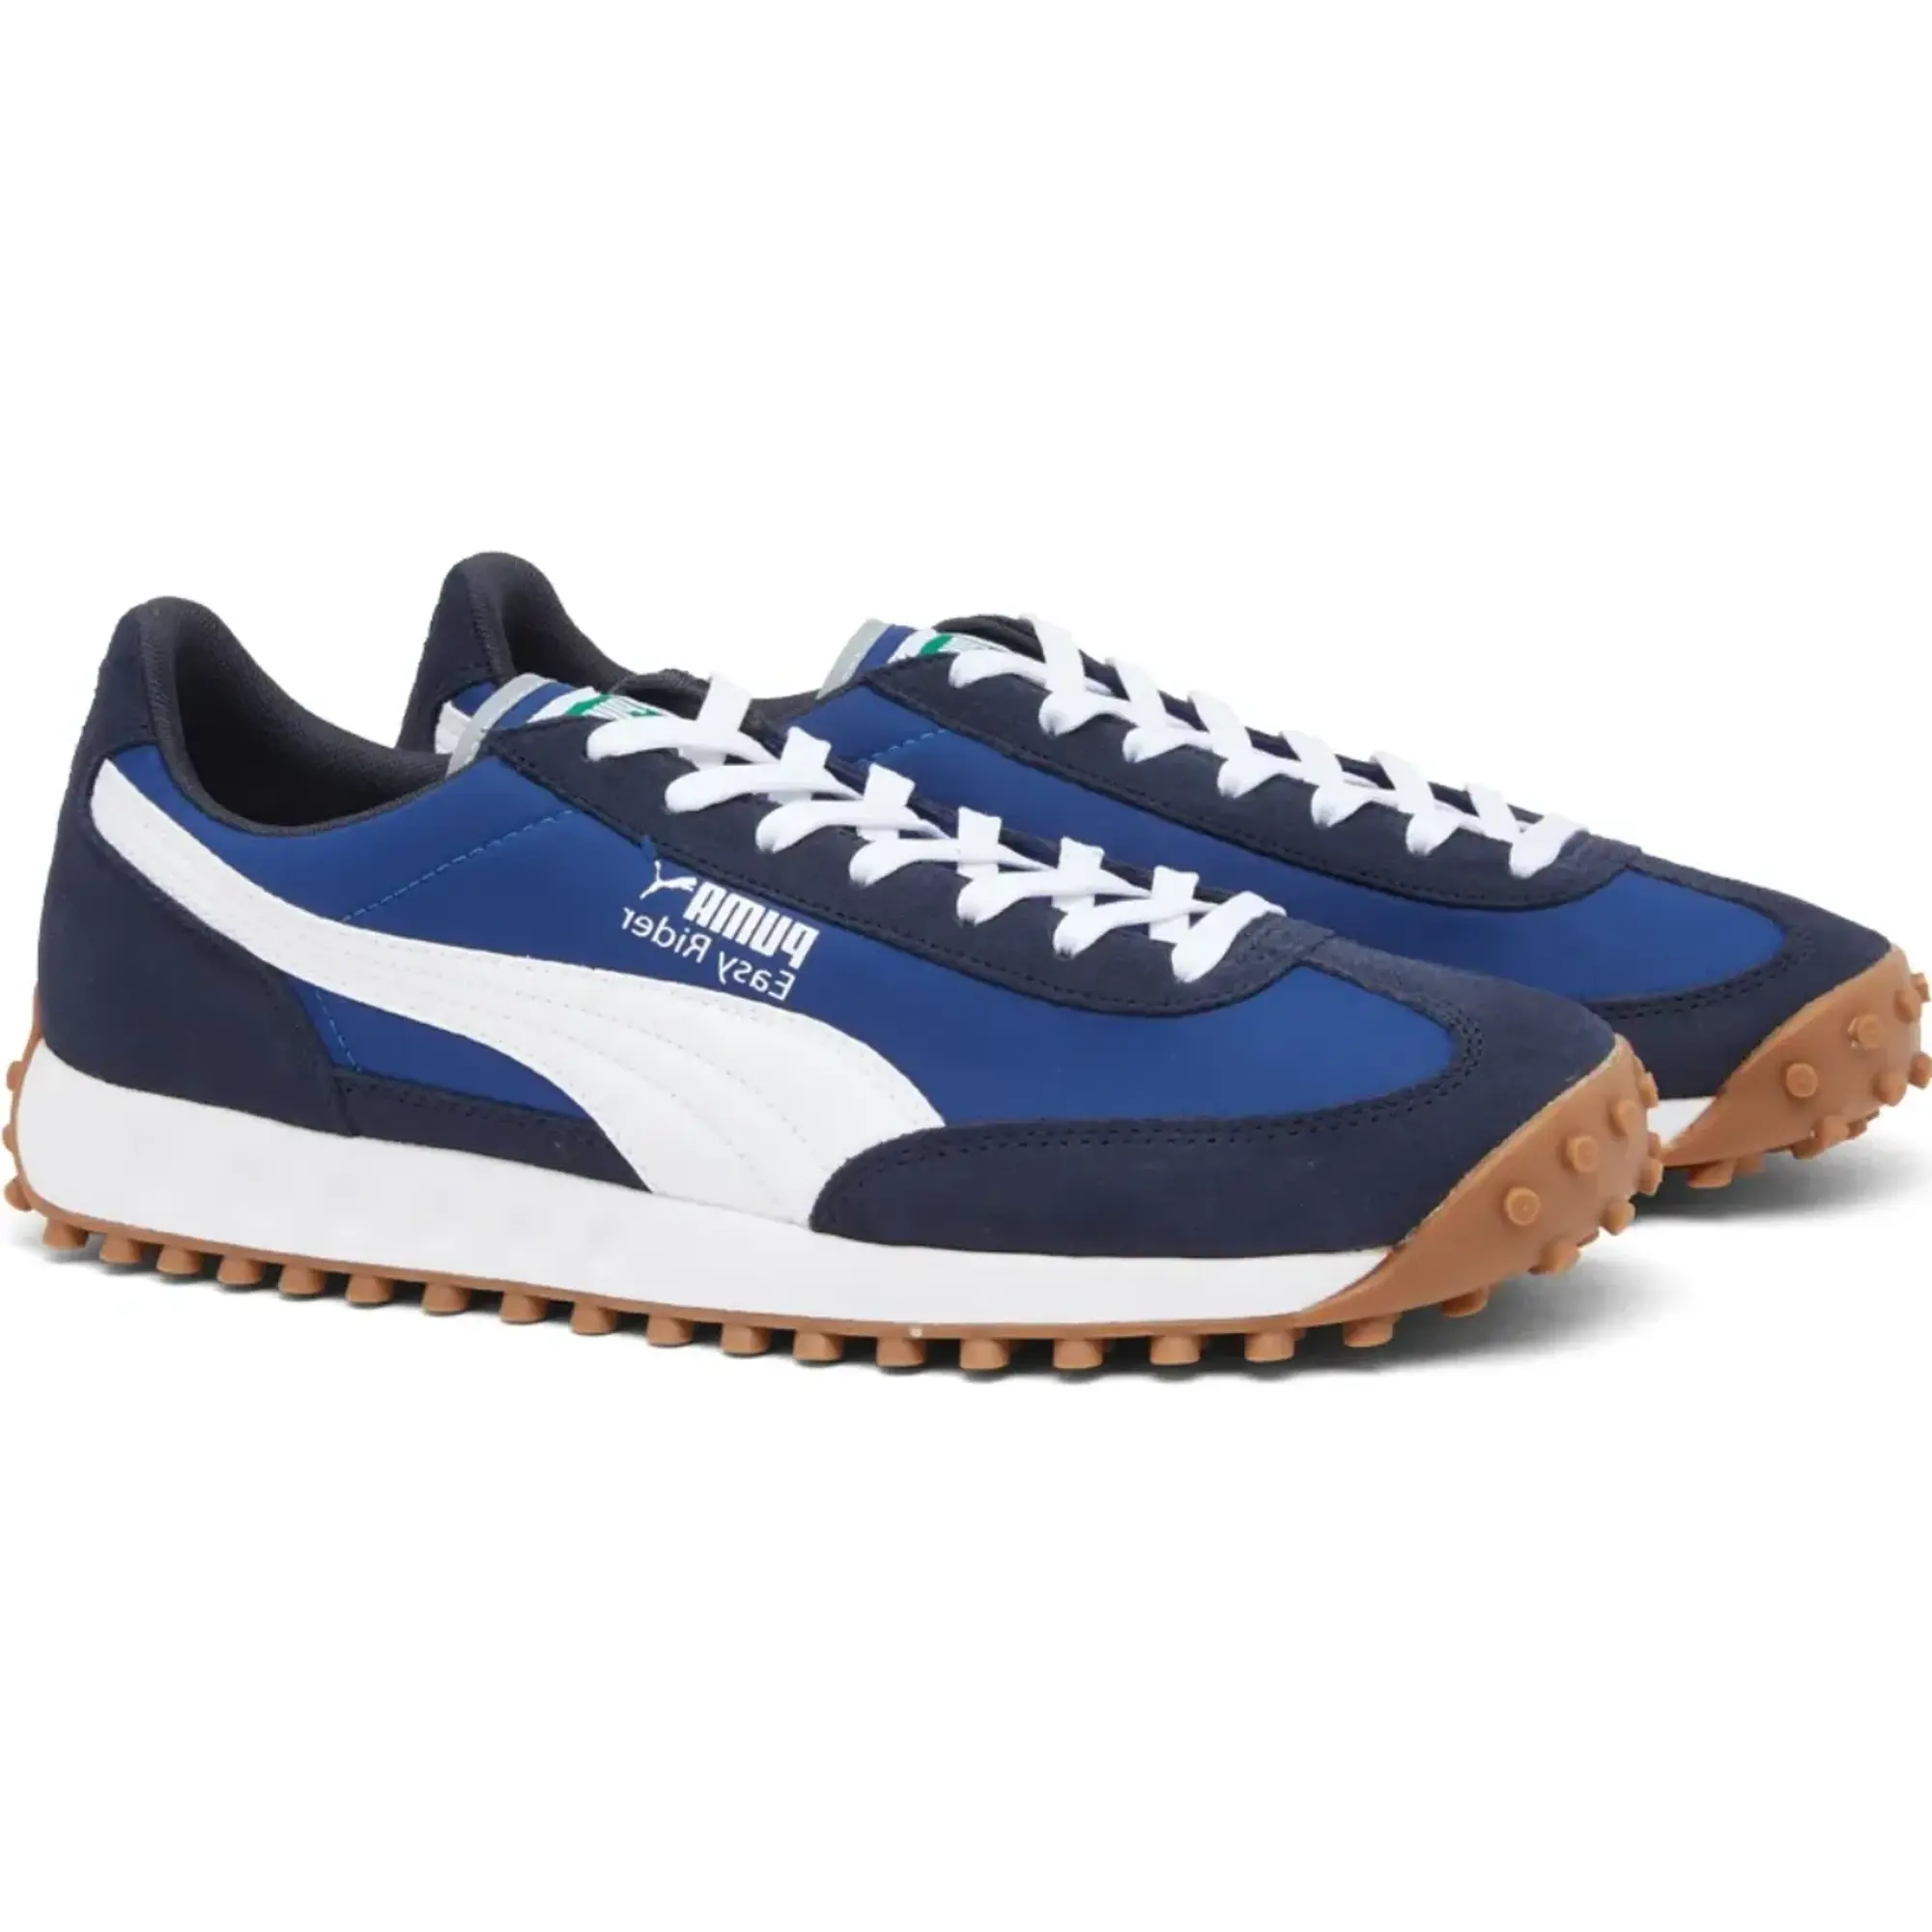 PUMA easy rider ii trainers in navy & white